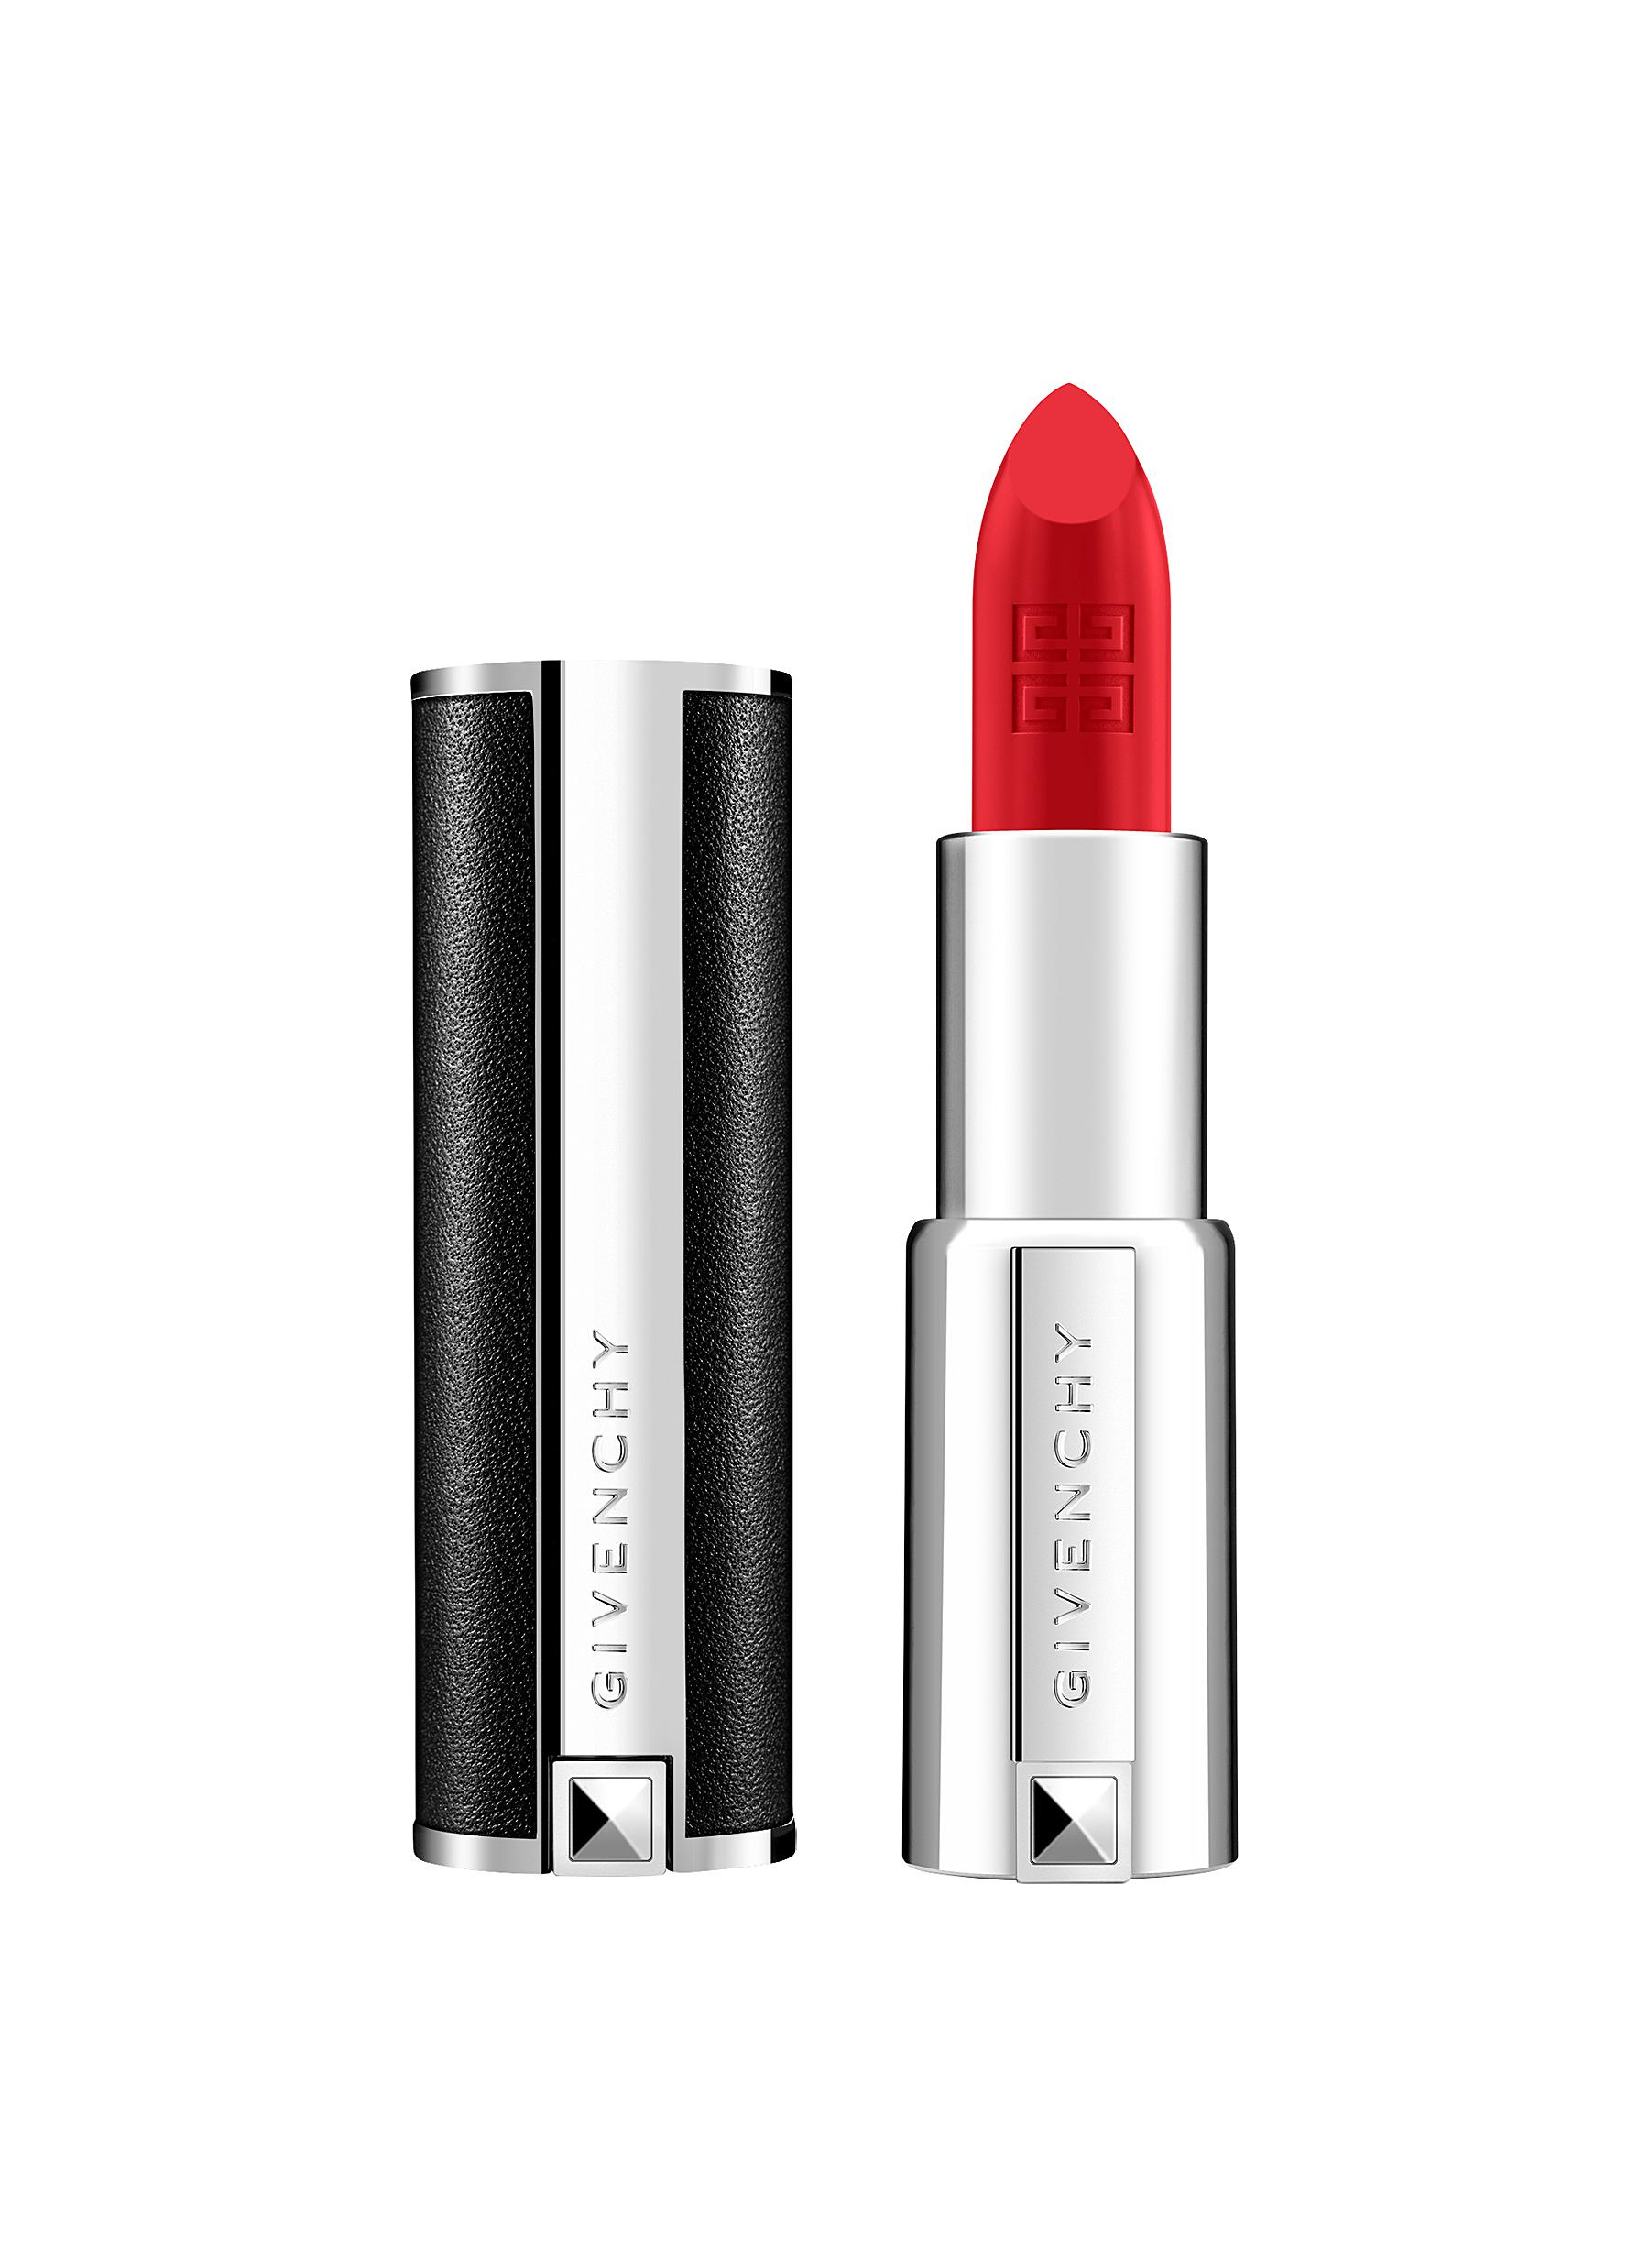 GIVENCHY BEAUTY | Le Rouge Lipstick 